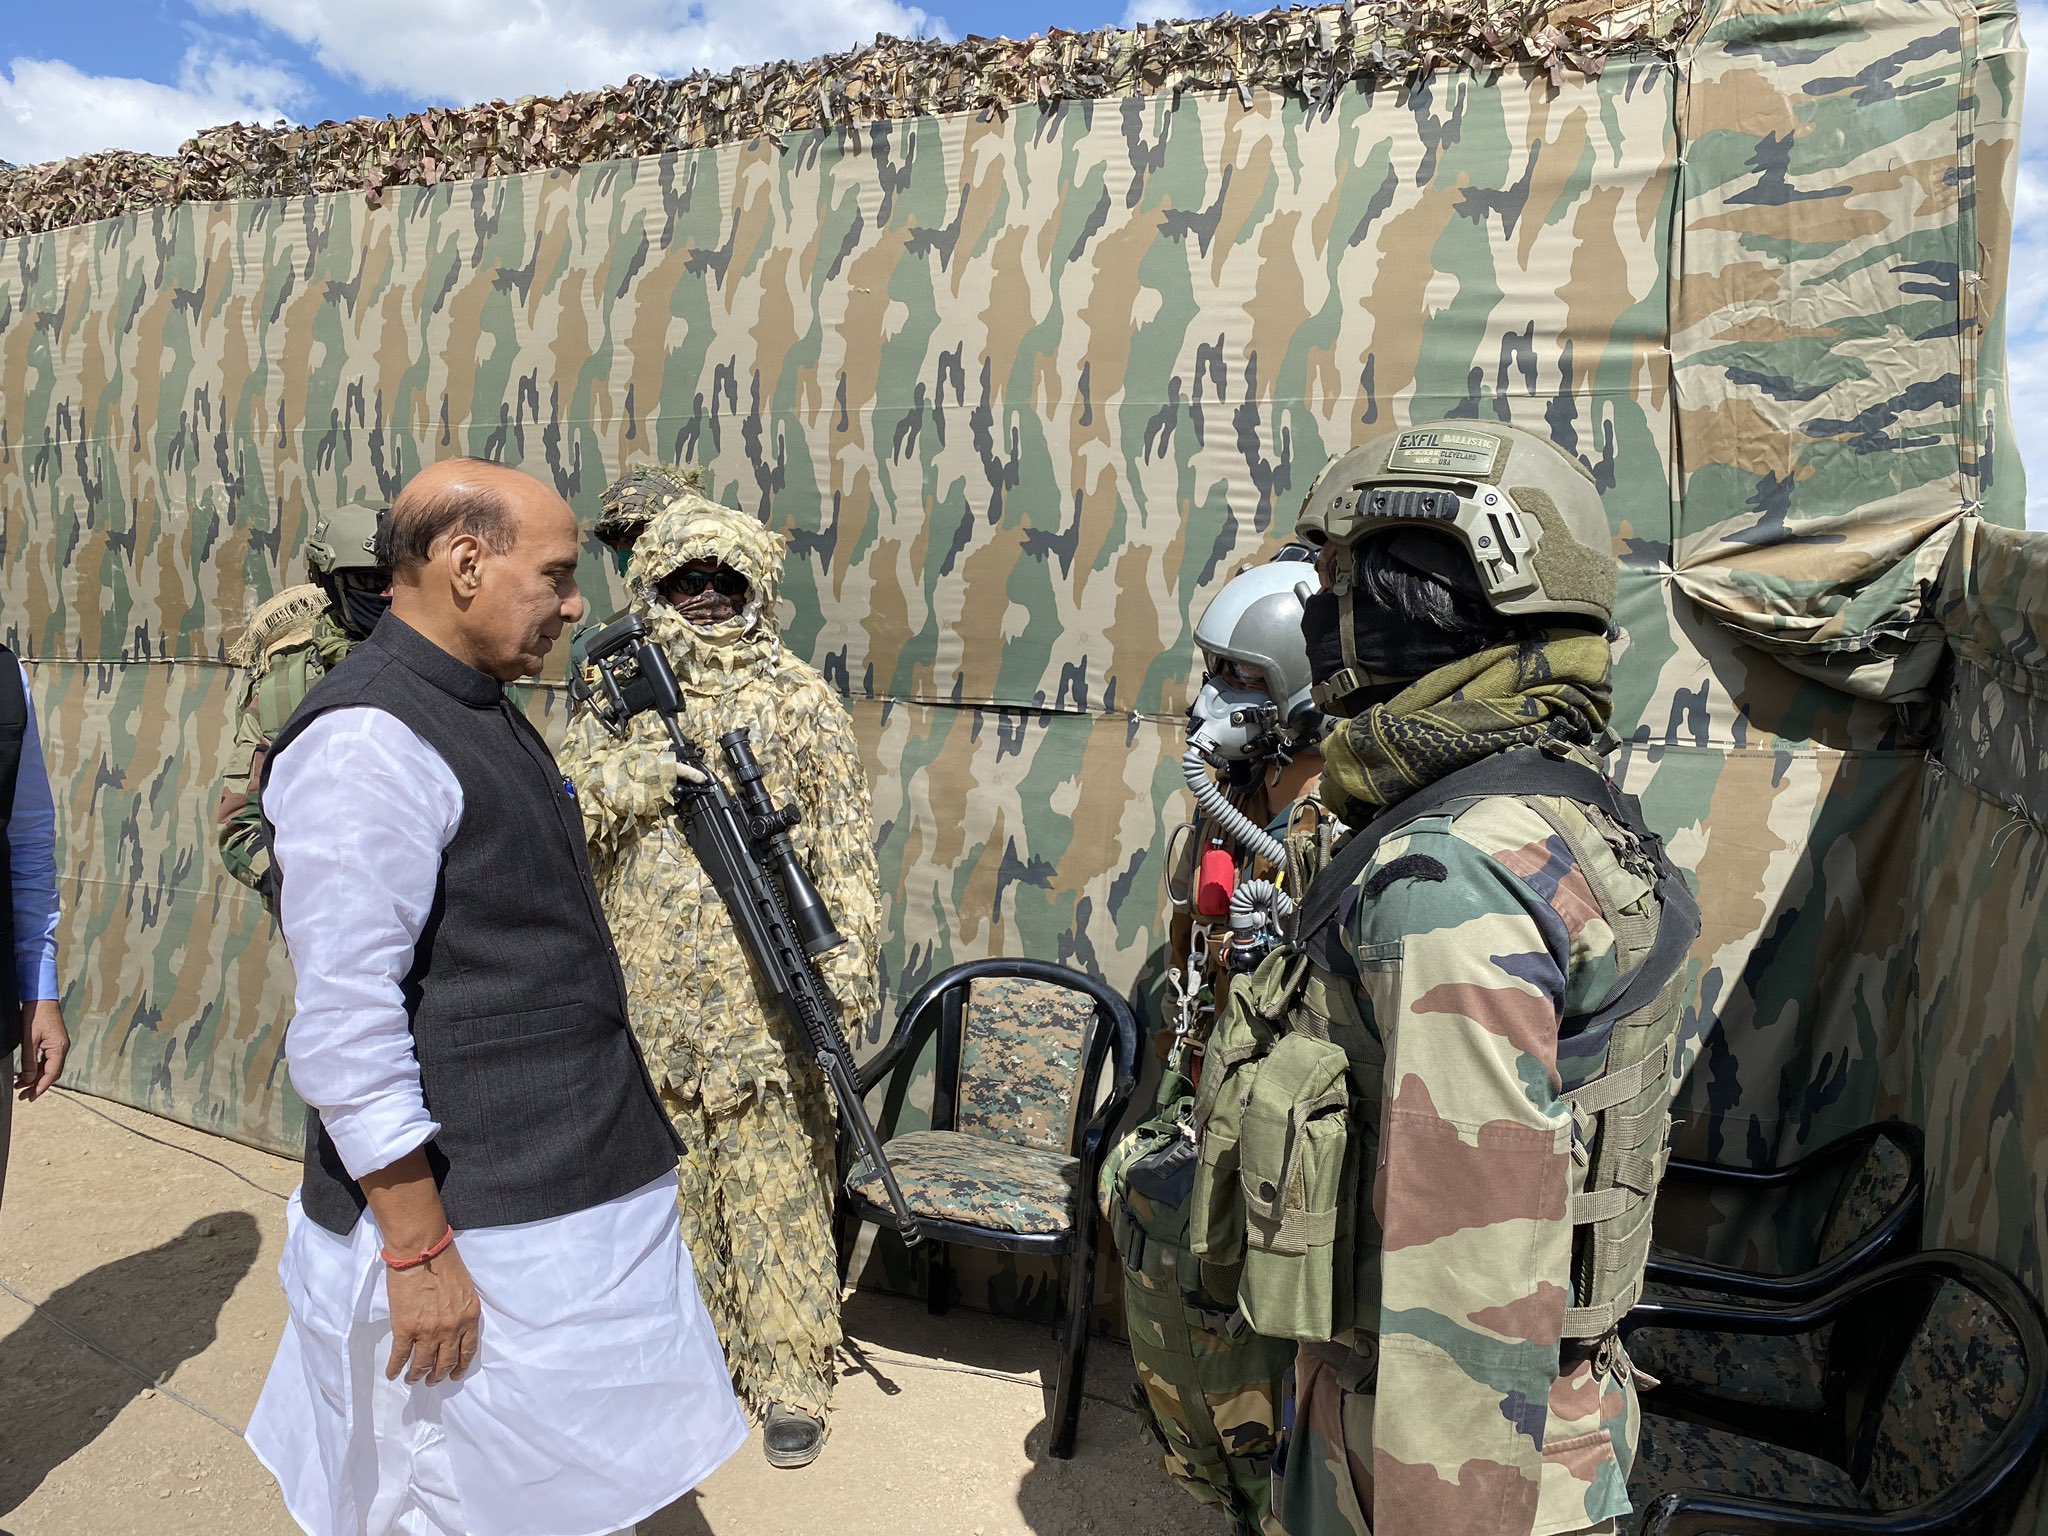 Defence Minister Rajnath Singh arrives in Leh to carry out security review